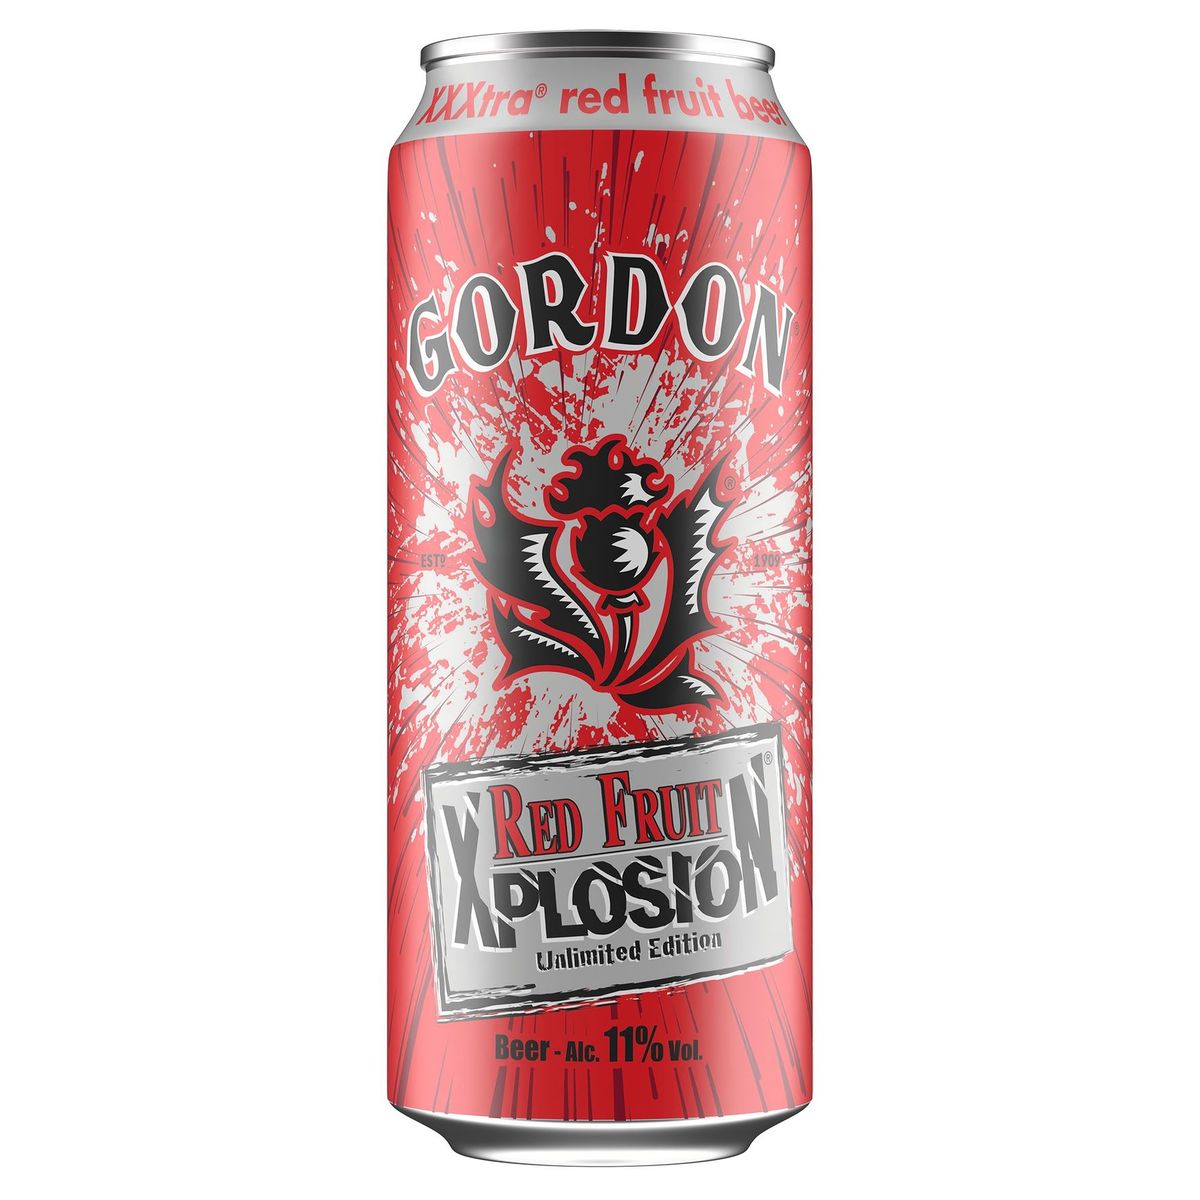 Gordon Red Fruit Xplosion Unlimited Edition XXXtra Red Fruit Beer Canette 50 cl